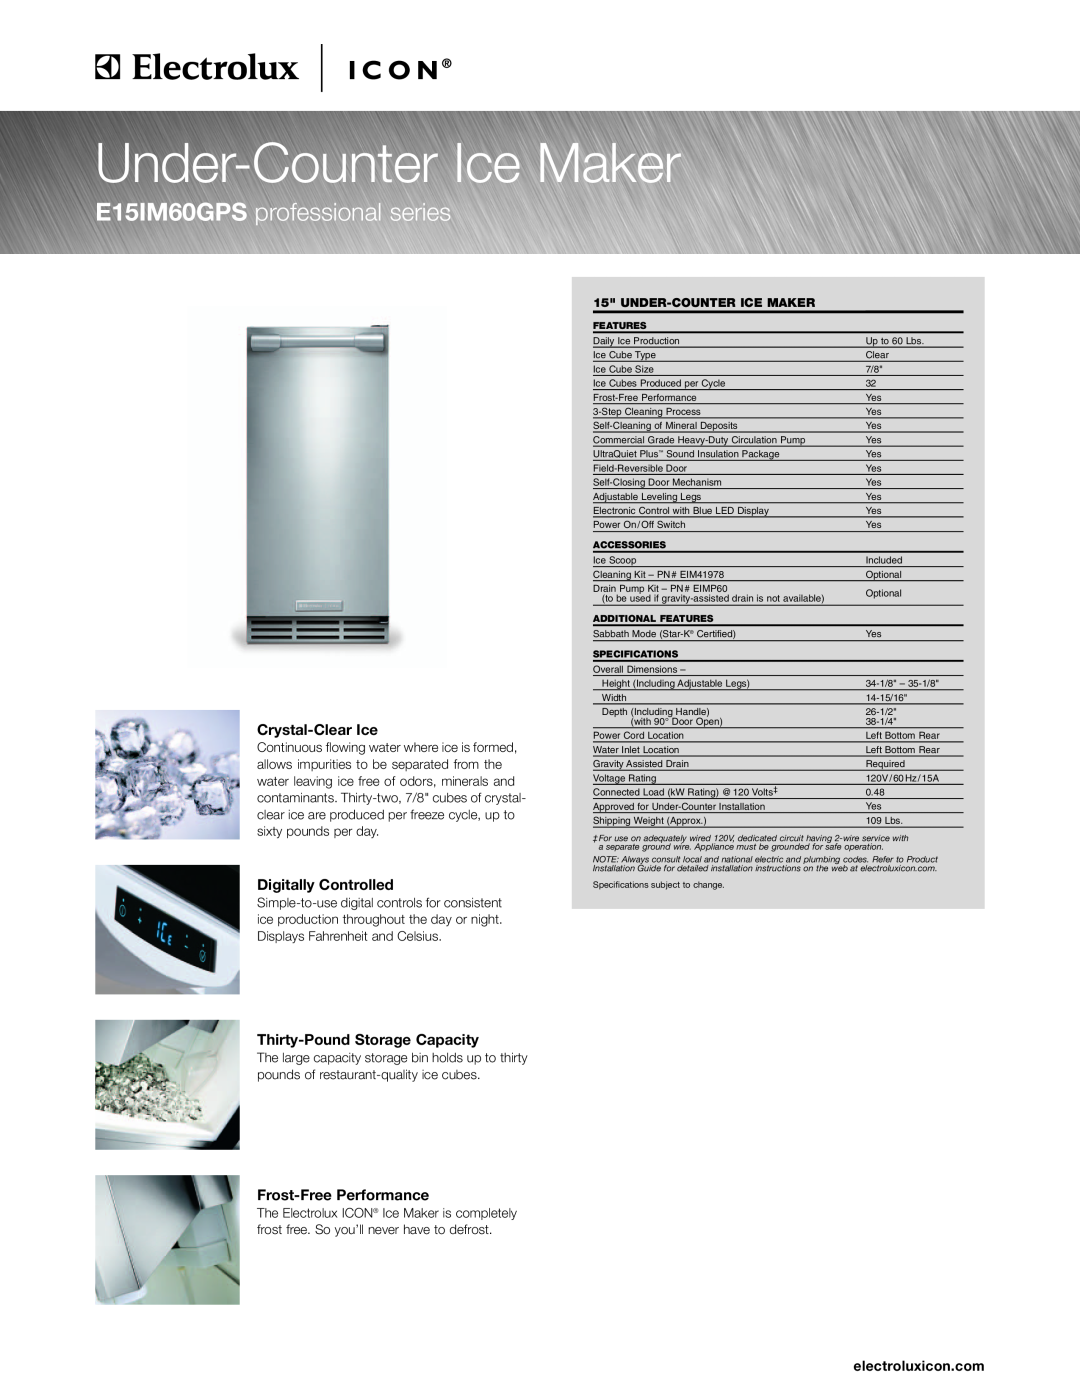 Electrolux E15IM60GPS specifications Crystal Clear Ice, Digitally Controlled, Thirty-Pound Storage Capacity 